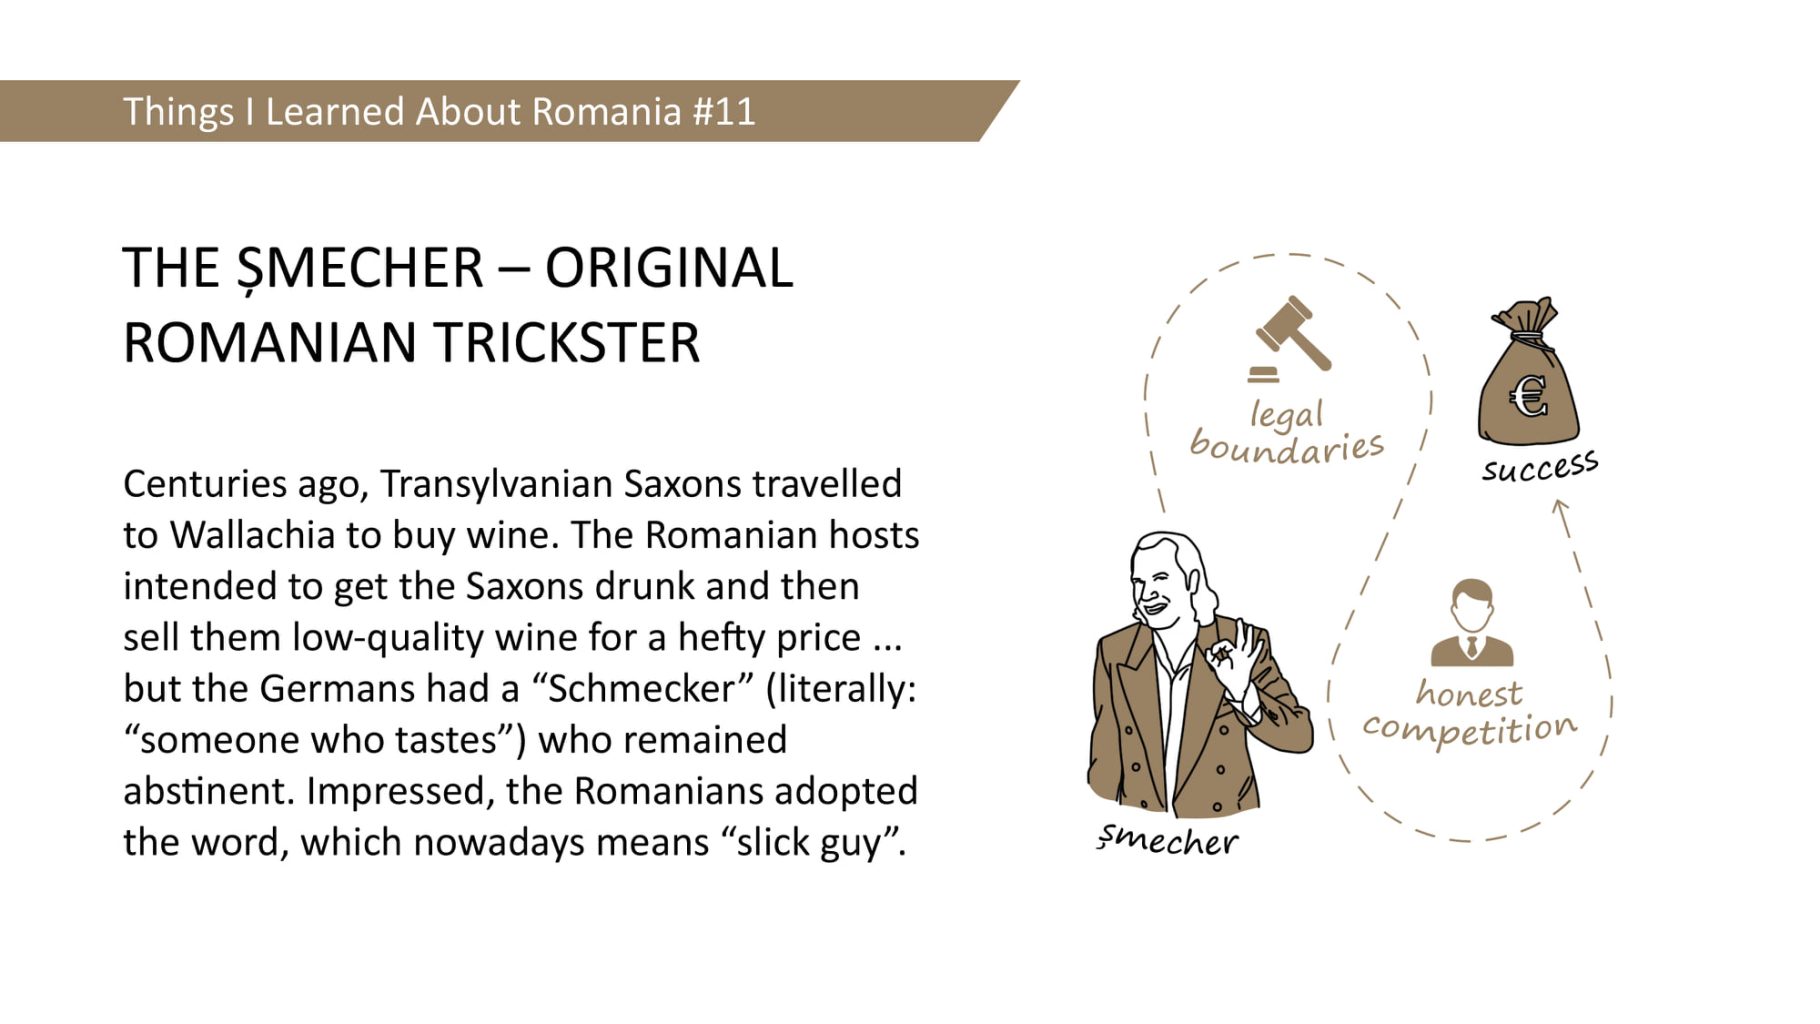 THE SMECHER - ORIGINAL ROMANIAN TRICKSTER: Centuries ago, Transylvanian Saxons travelled to Wallachia to buy wine. The Romanian hosts intended to get the Saxons drunk and then sell them low-quality wine for a hefty price ... but the Germans had a "Schmecker" (literally: "someone who tastes") who remained abstinent. Impressed, the Romanians adopted the word, which nowadays means "slick guy".